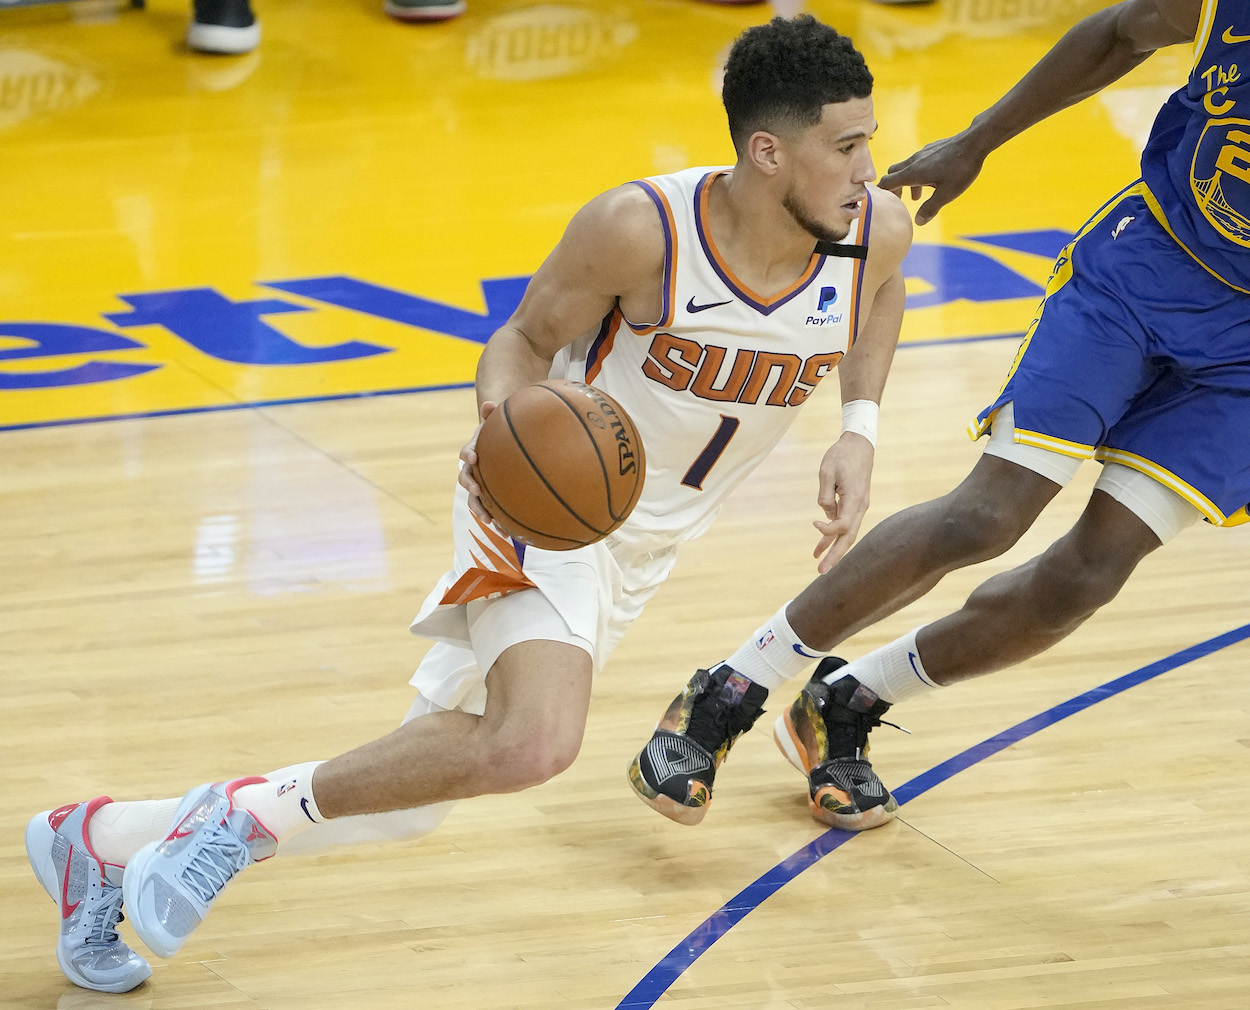 Devin Booker of the Phoenix Suns dribbling the ball drives towards the basket against the Golden State Warriors during the second half of an NBA basketball game at Chase Center on May 11, 2021 in San Francisco, California.